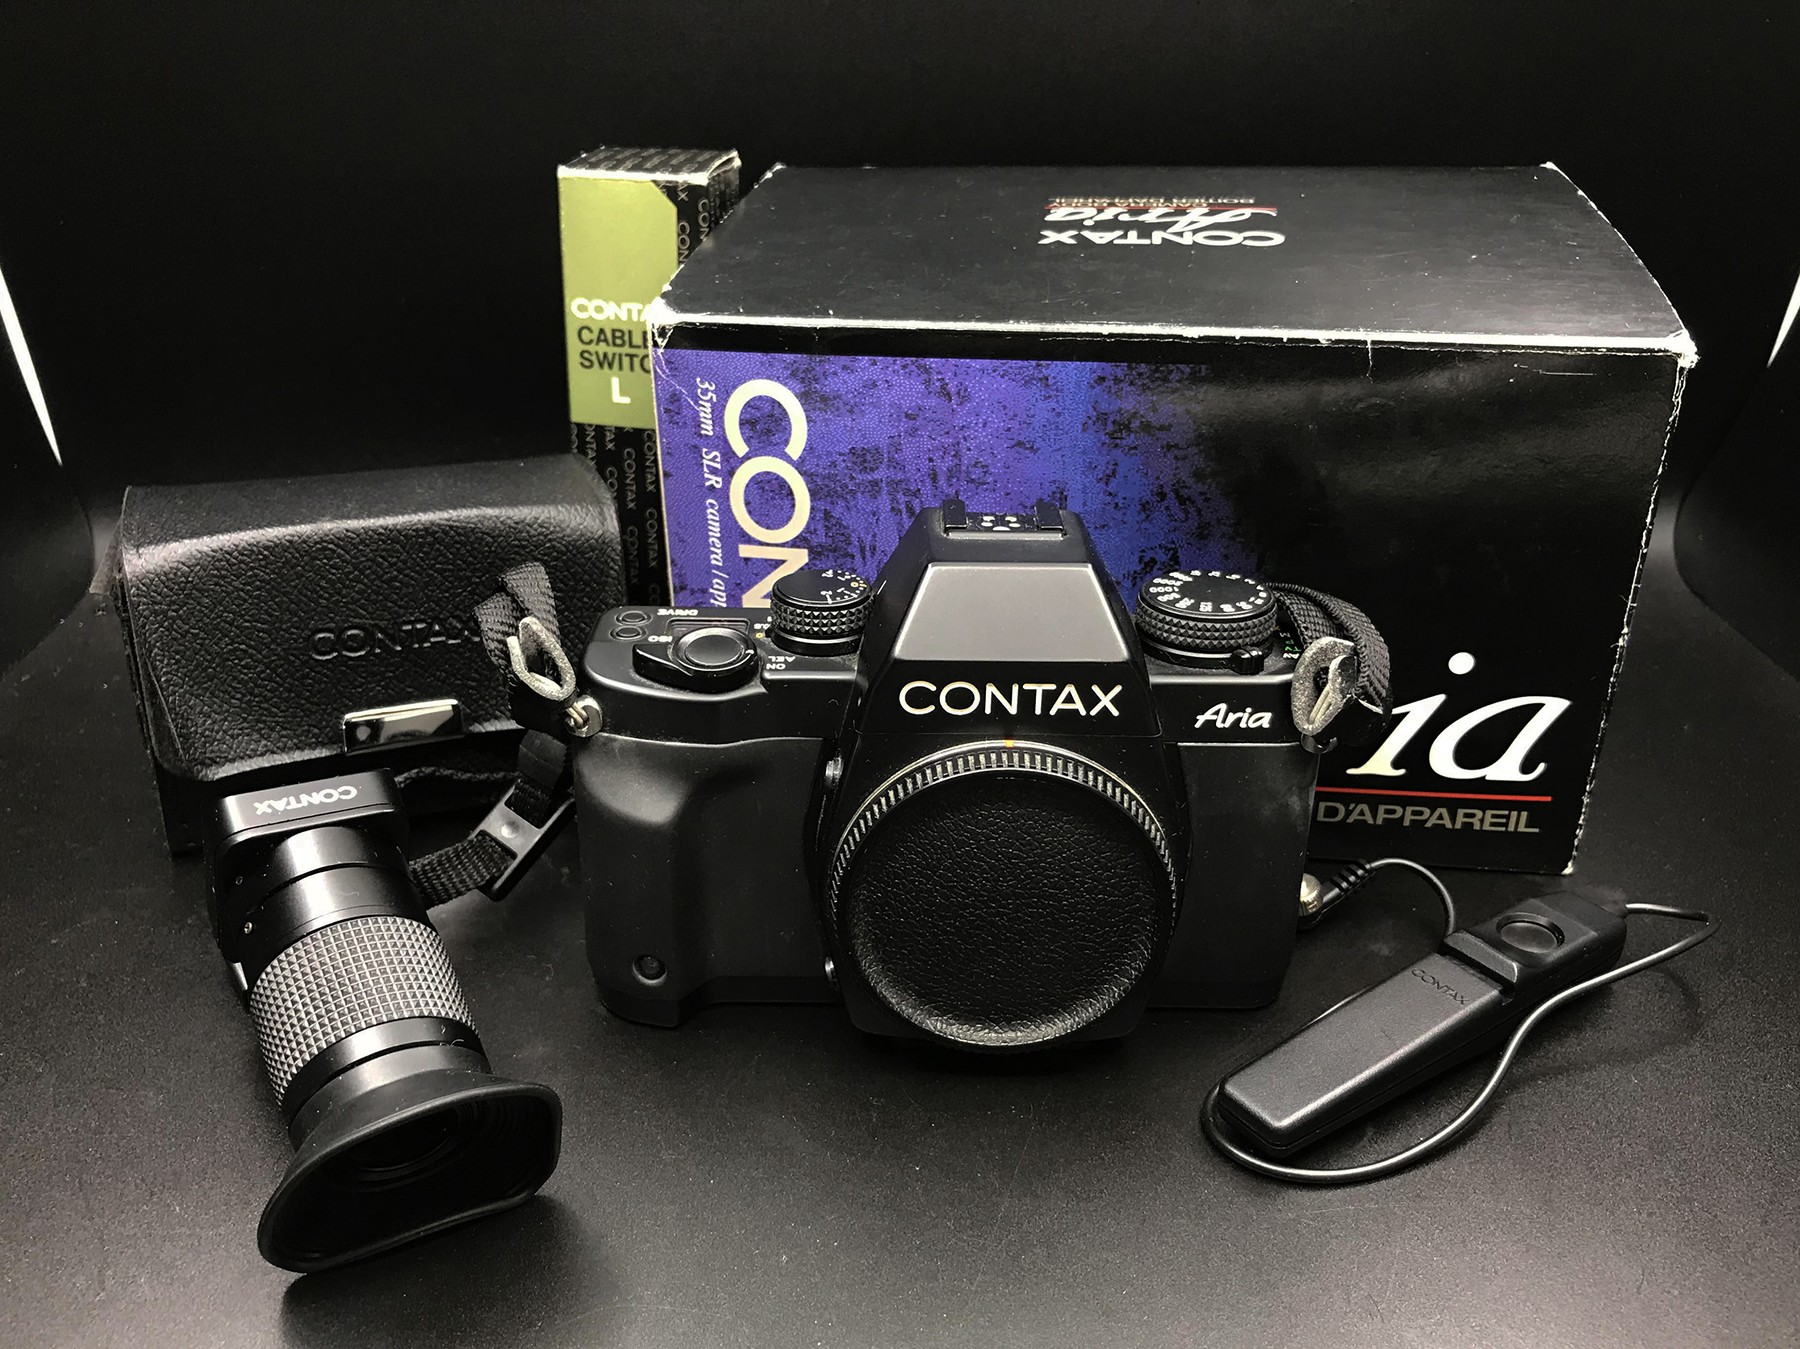 Contax Aria Film Camera With Contax Viewfinder - meteor